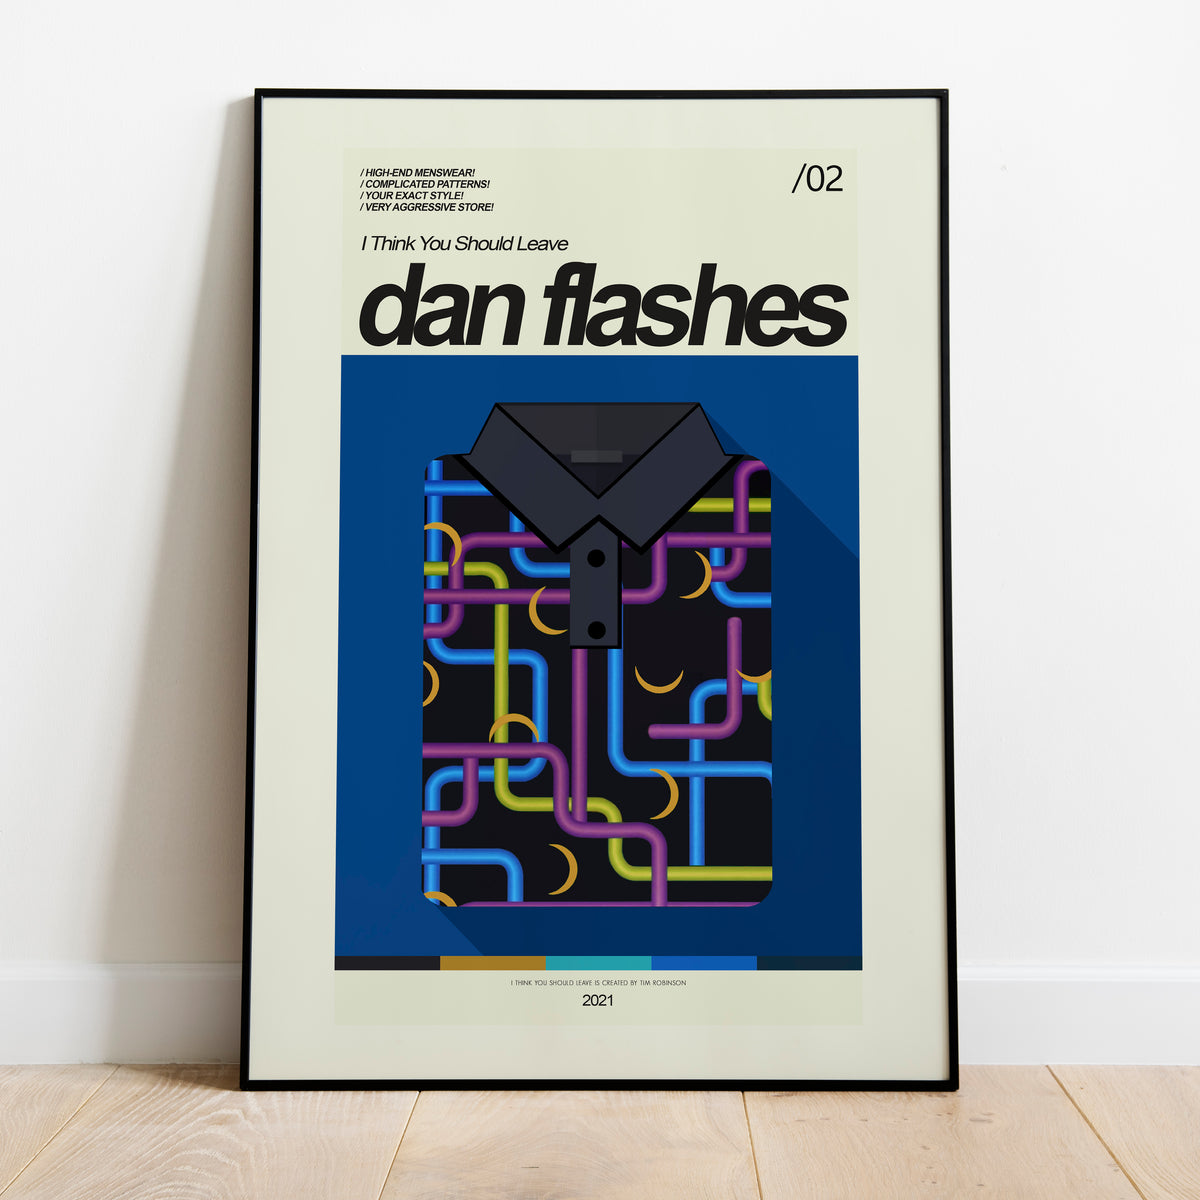 Dan Flashes - I Think You Should Leave | 12"x18" or 18"x24" Print only